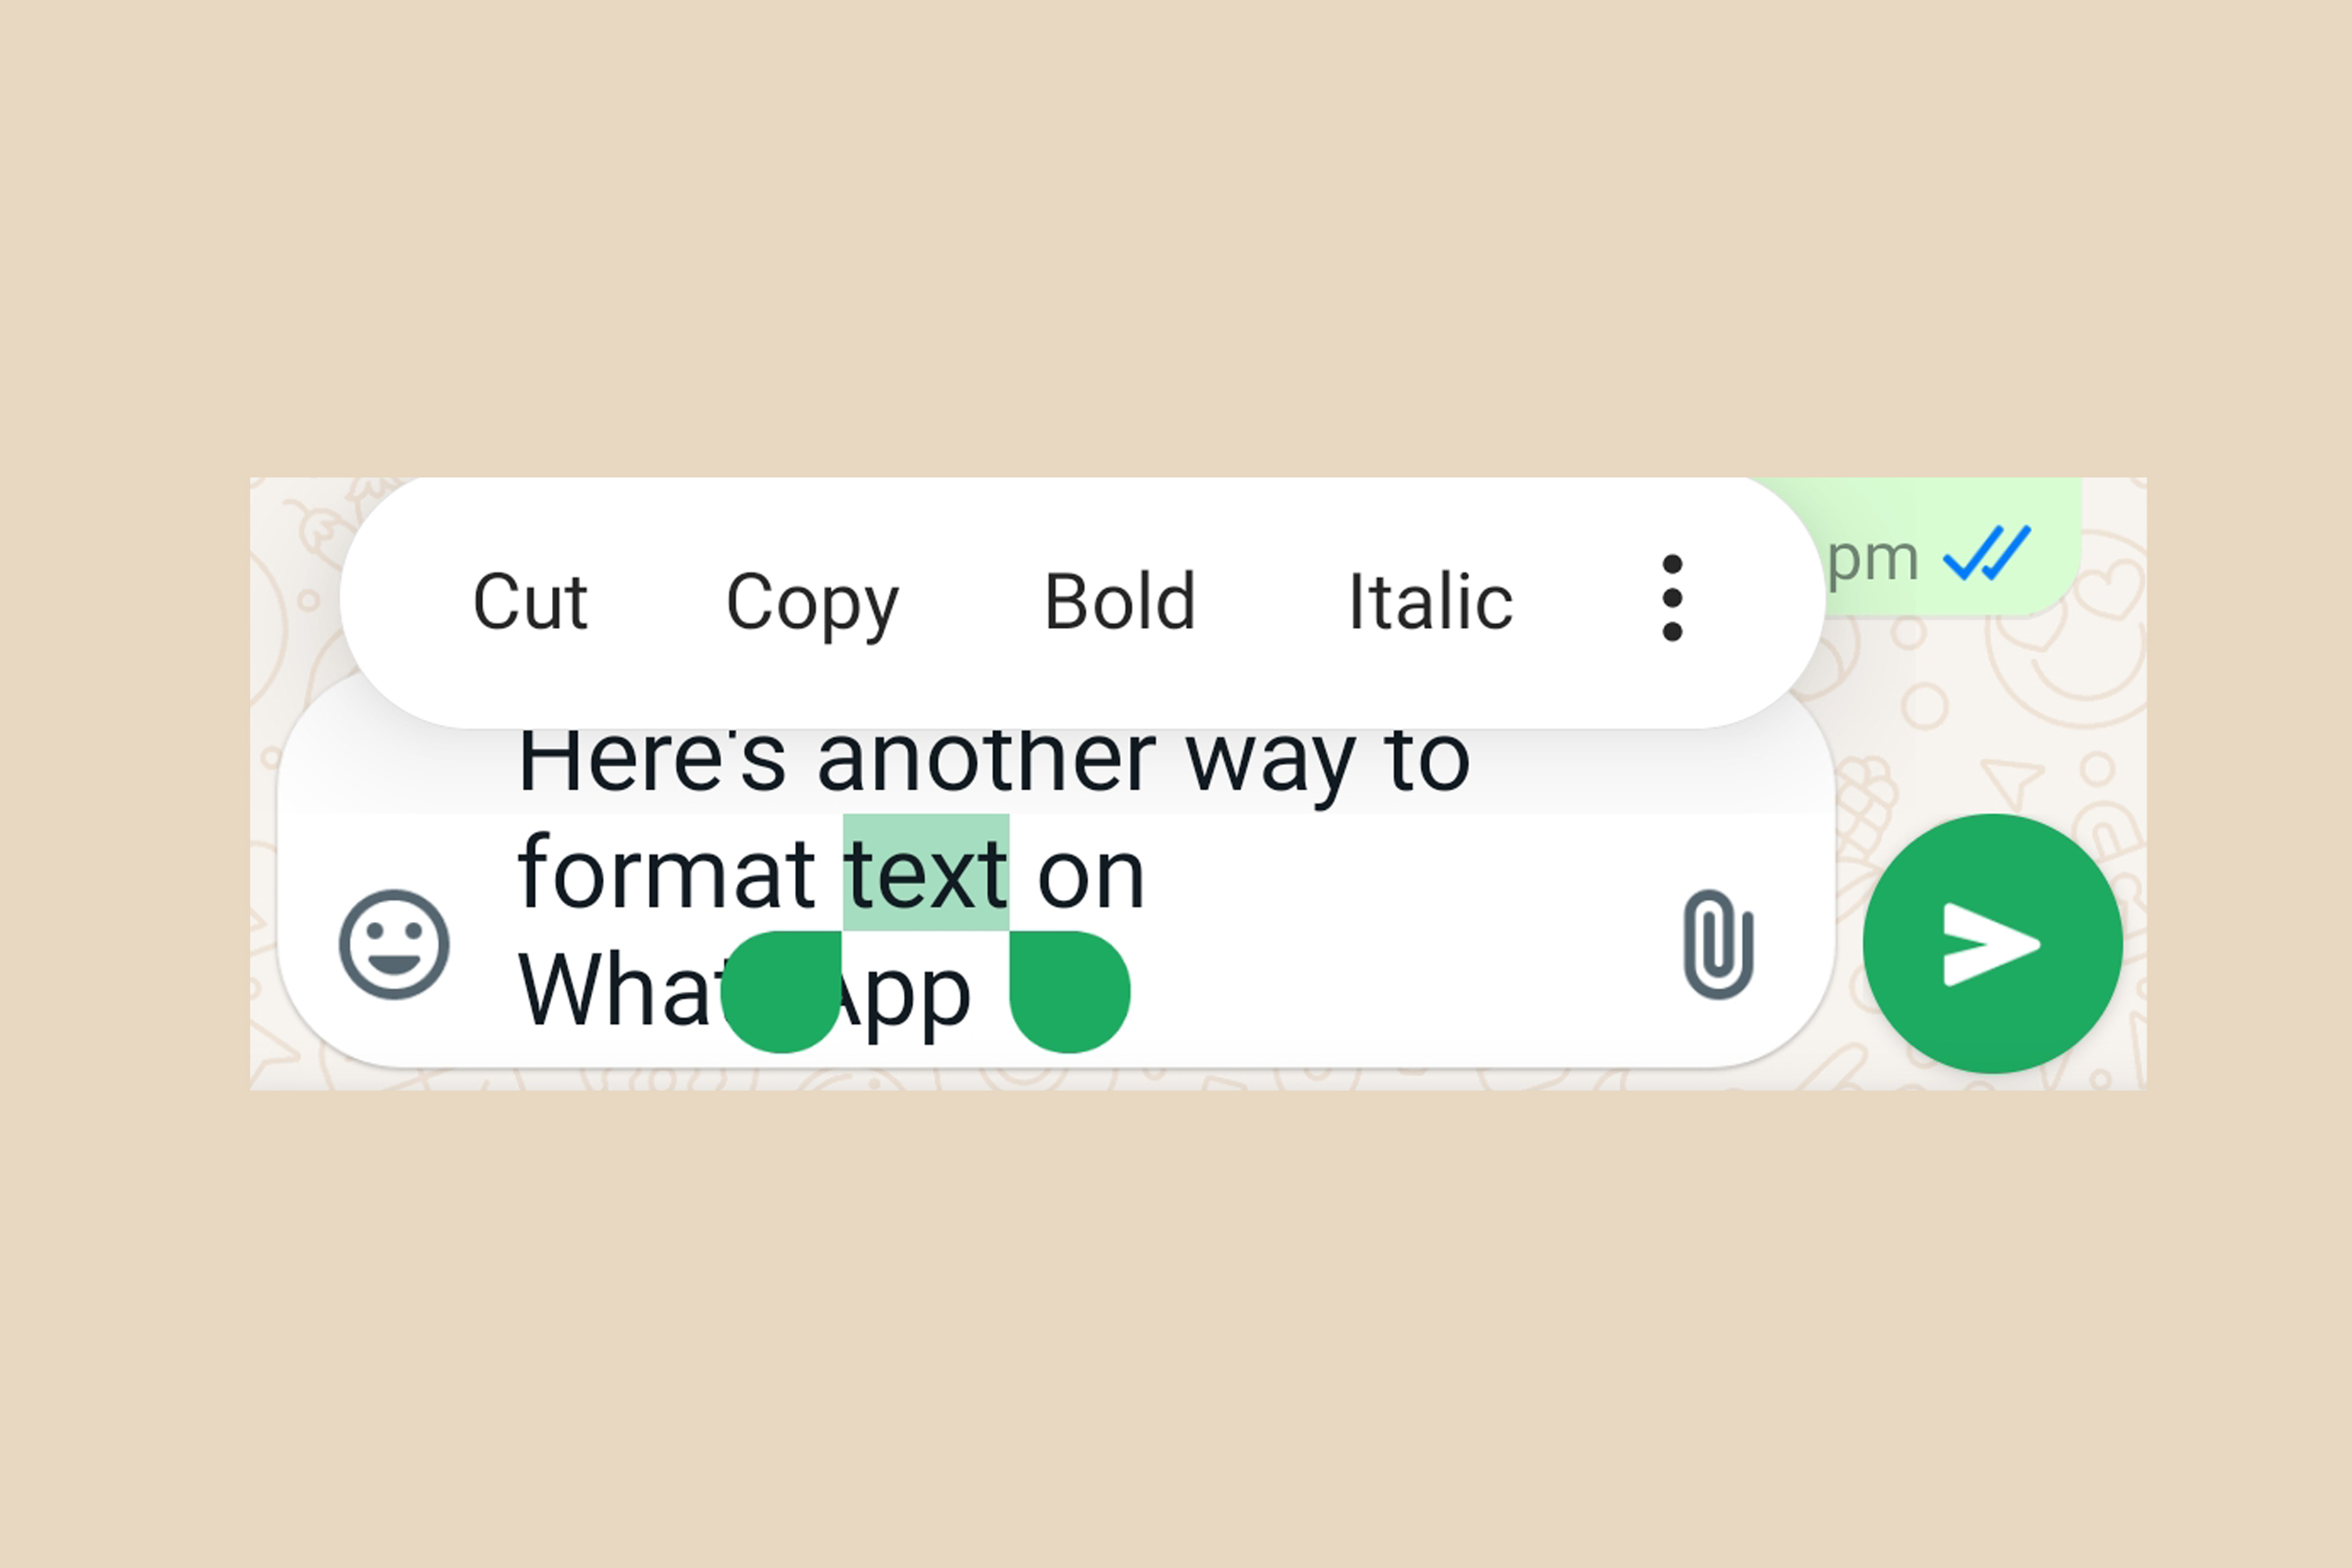 How to format text on WhatsApp.